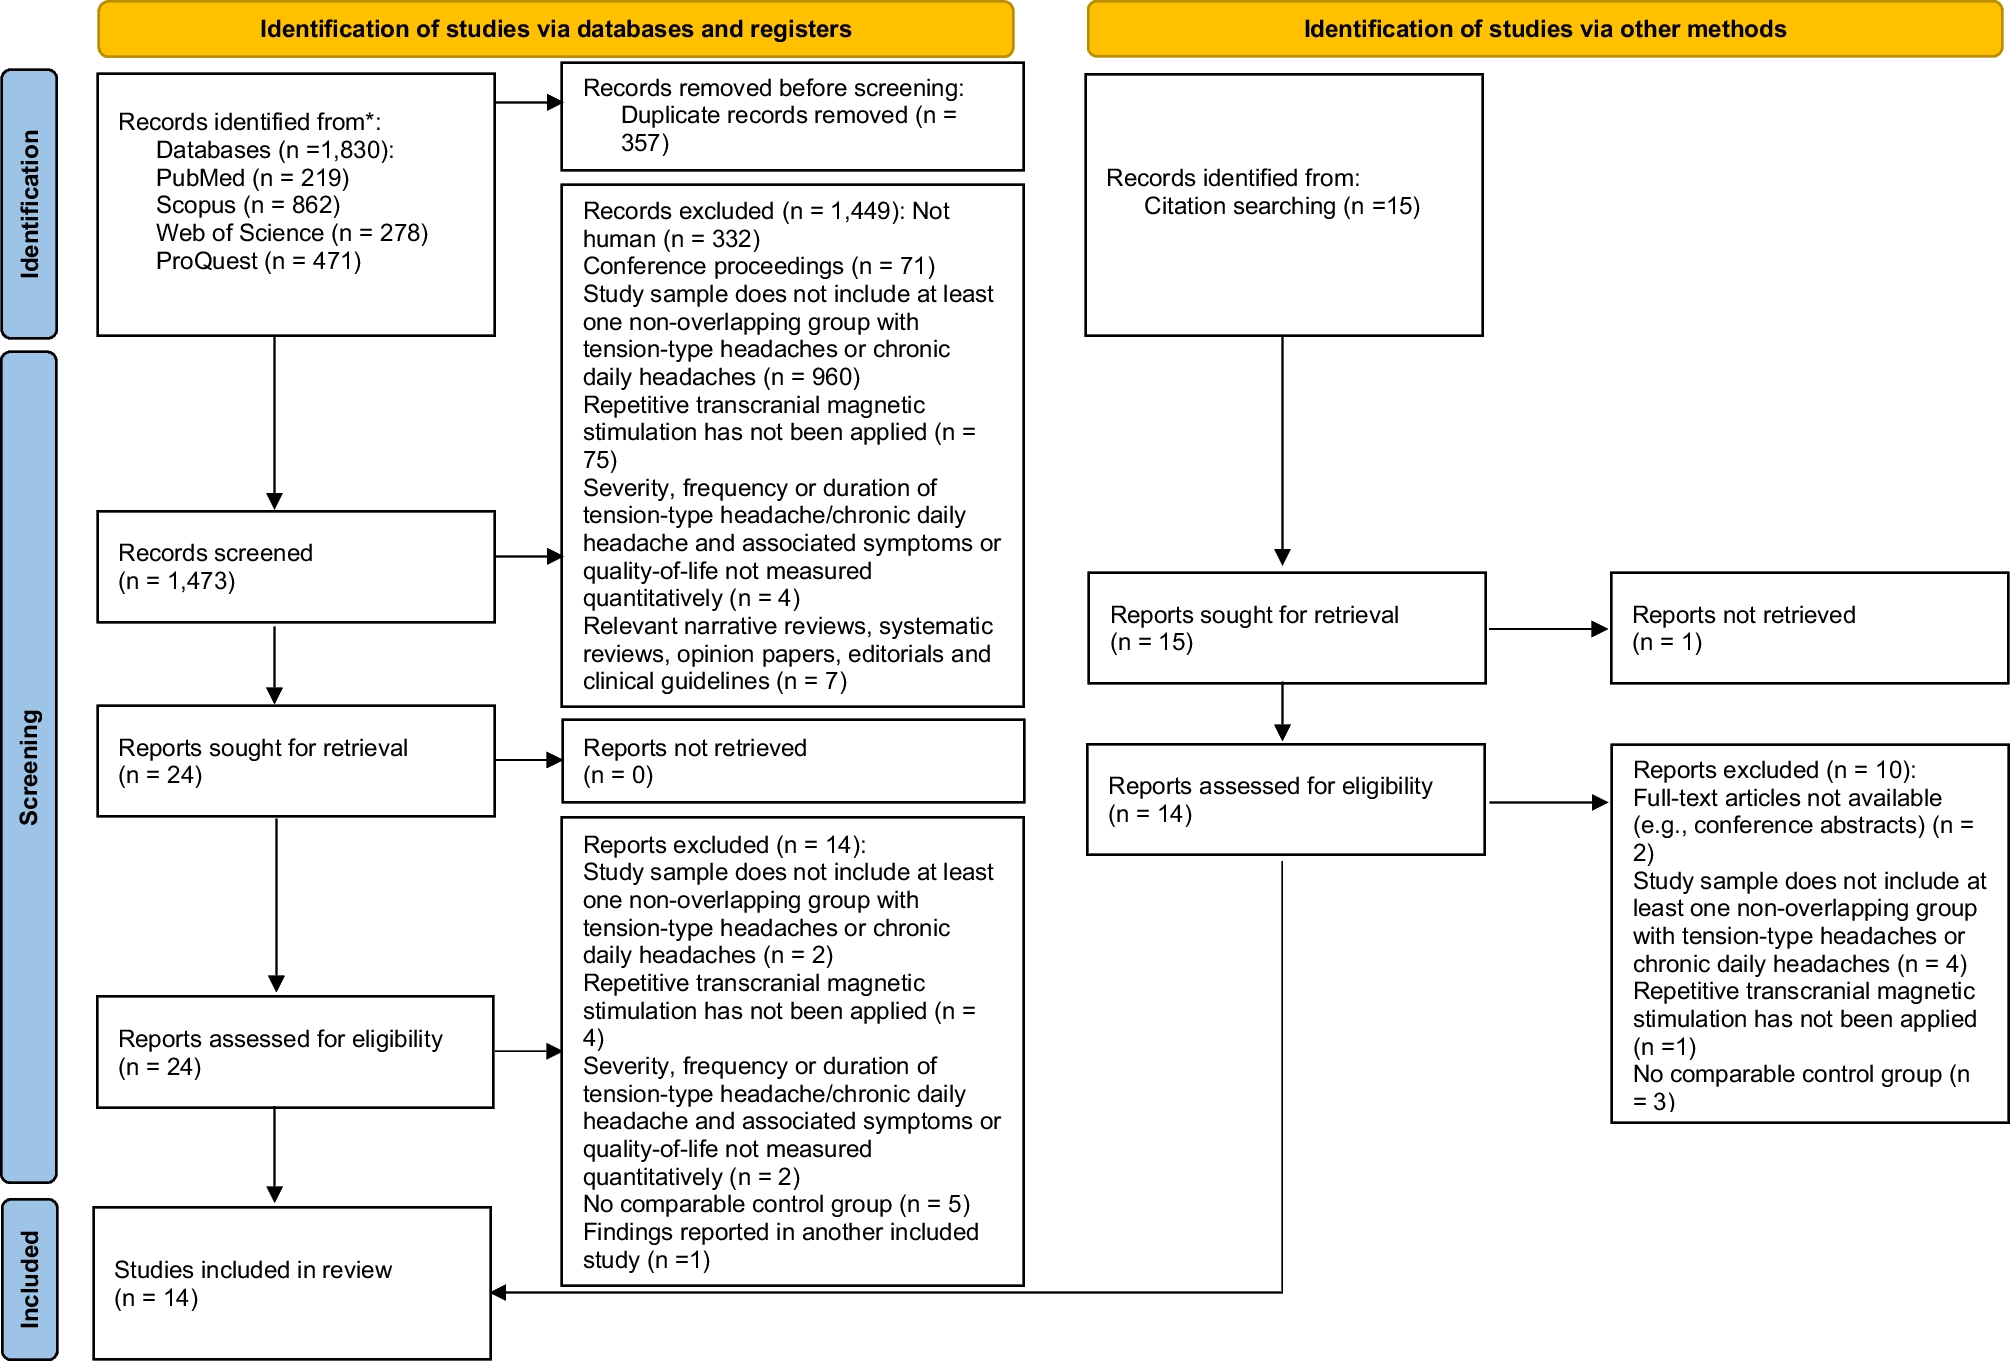 Utility of Repetitive Transcranial Magnetic Stimulation for Chronic Daily Headache Prophylaxis: A Systematic Review and Meta-Analysis